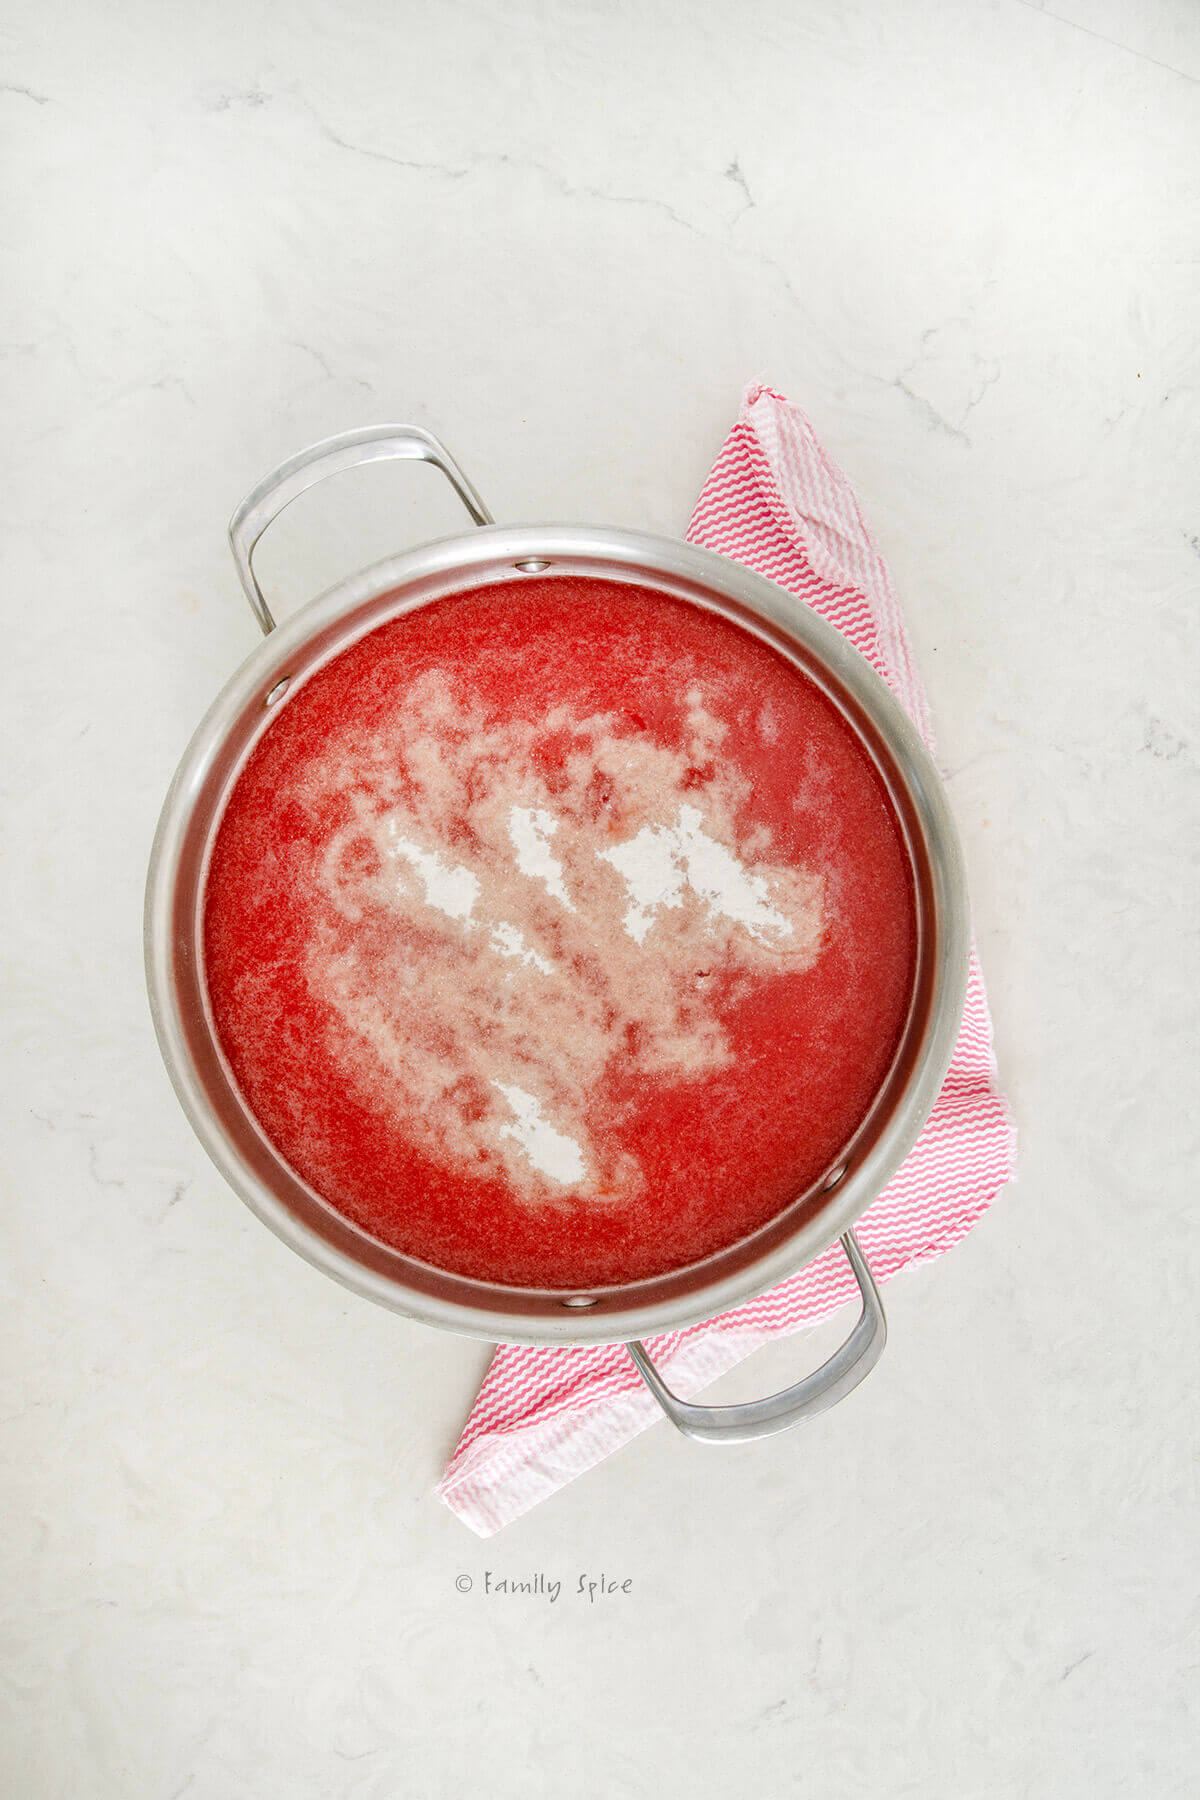 Top view of a stainless pot filled with strained watermelon juice and sugar